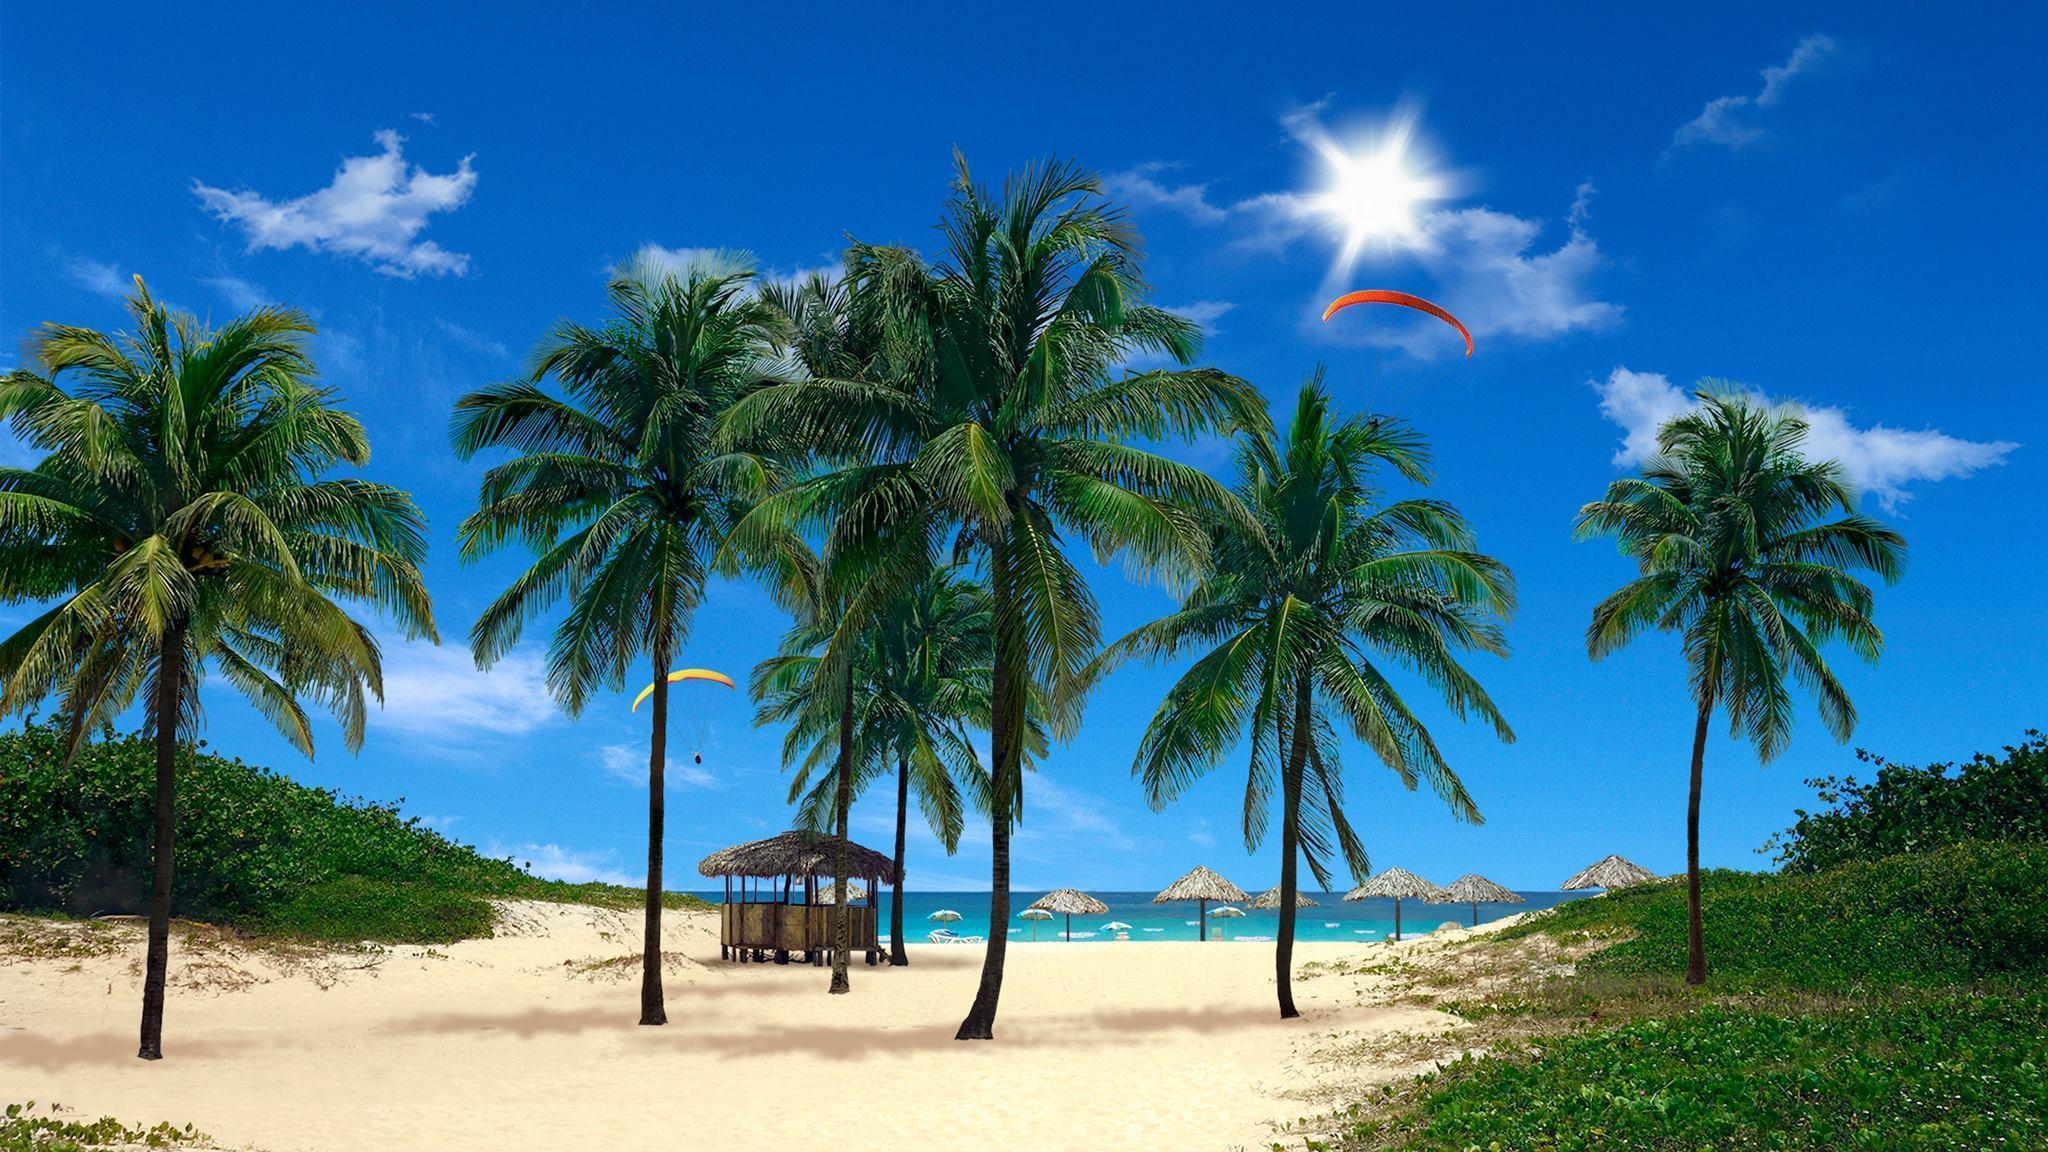 Real Snowfall & Beach Palms 3D are two live wallpaper to spruce